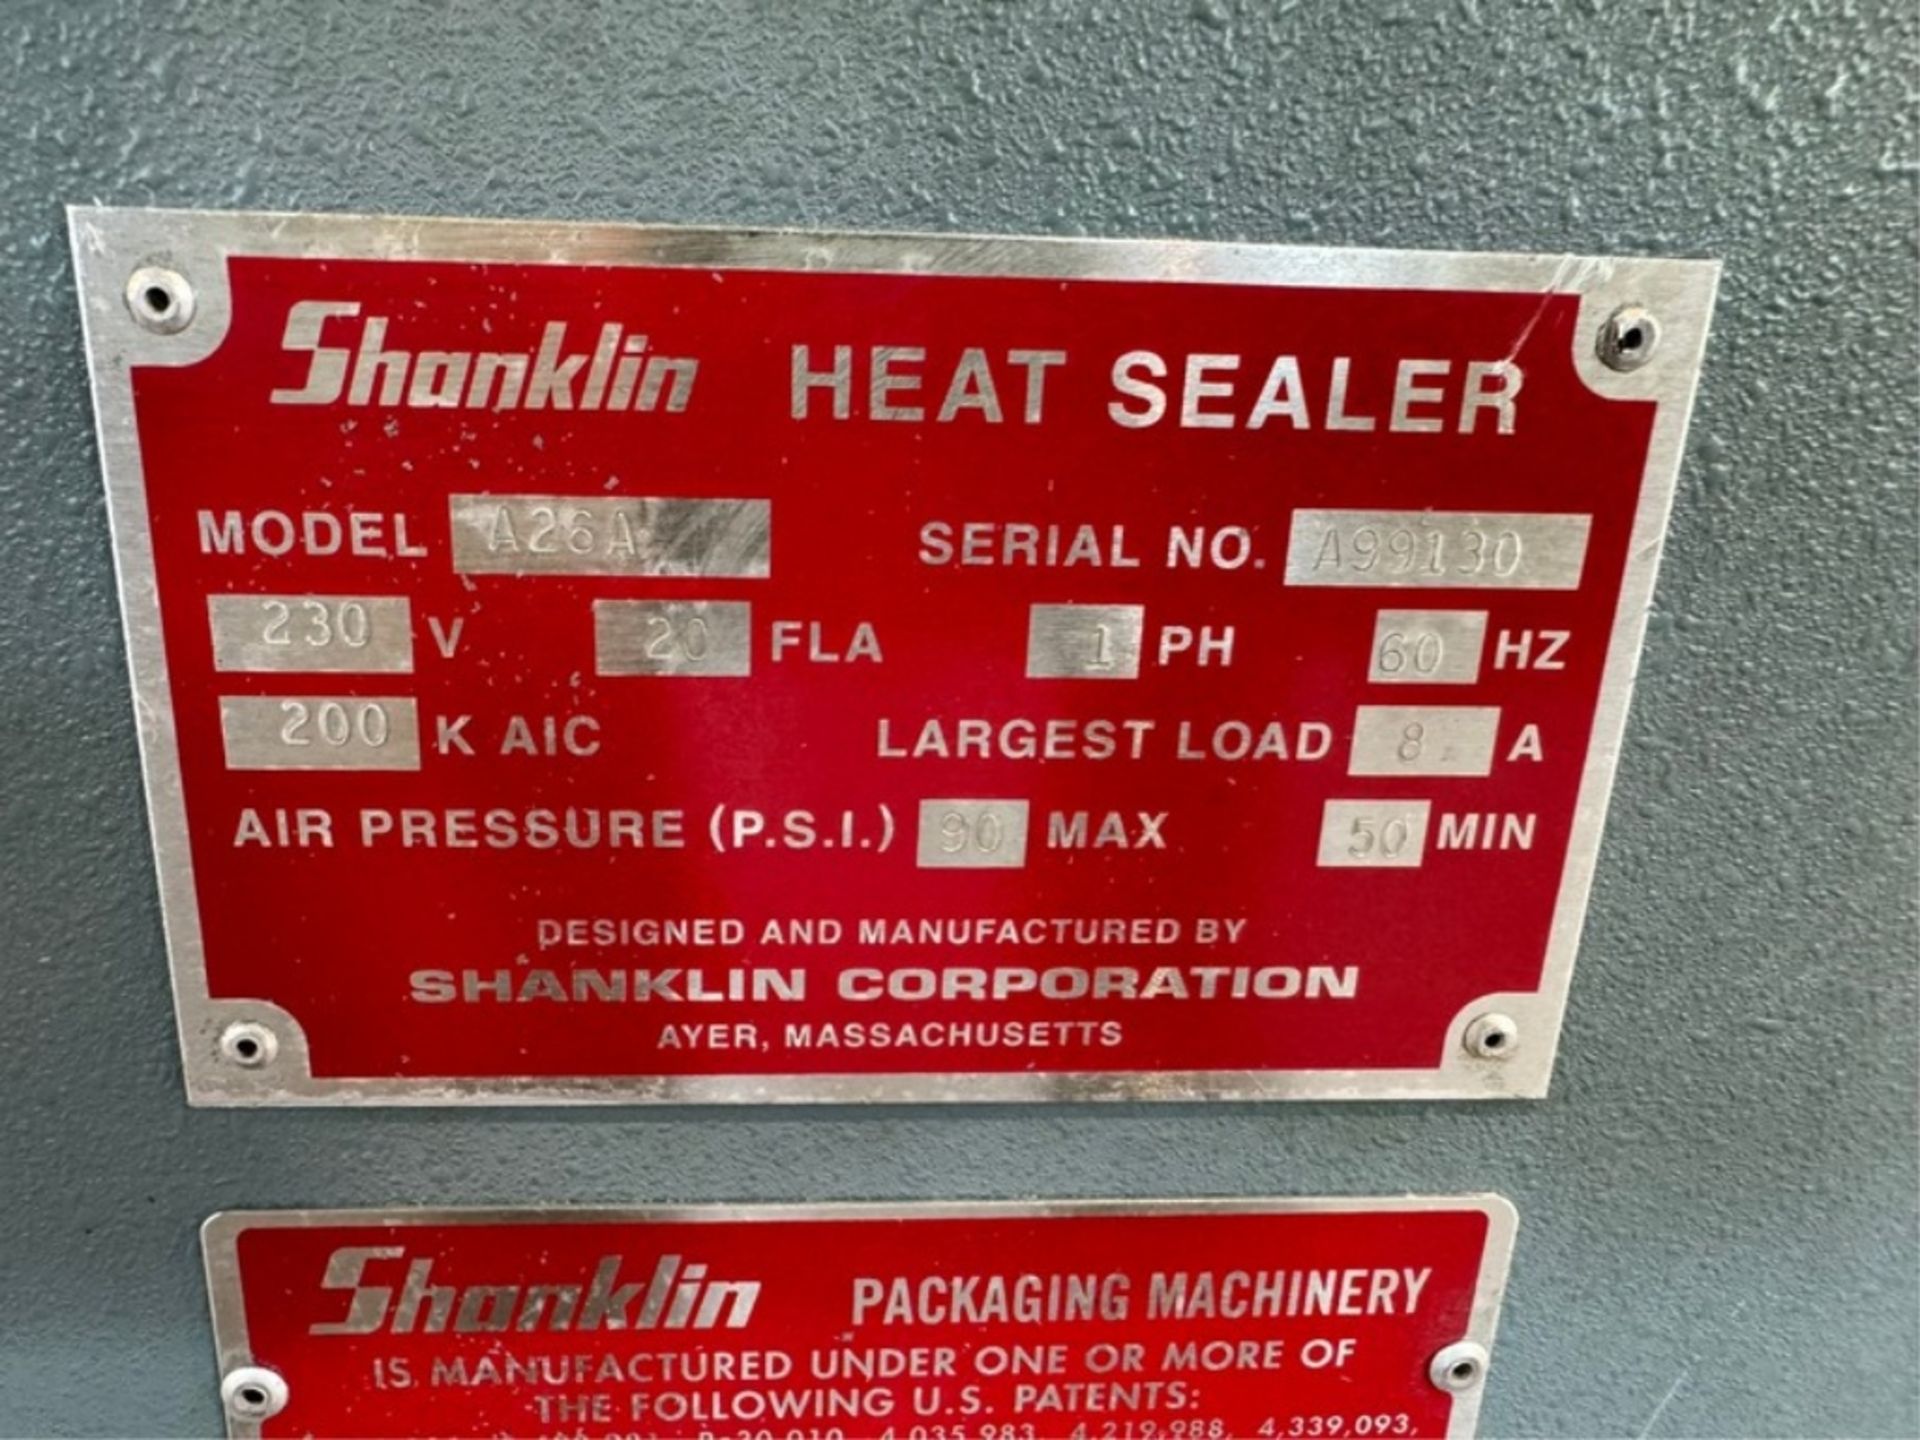 Shanklin Heat Sealer, M/N A26A, S/N A99130, 230 Volts, 3 Phase, with Allen-Bradley MicroLogix 1000 - Image 11 of 13